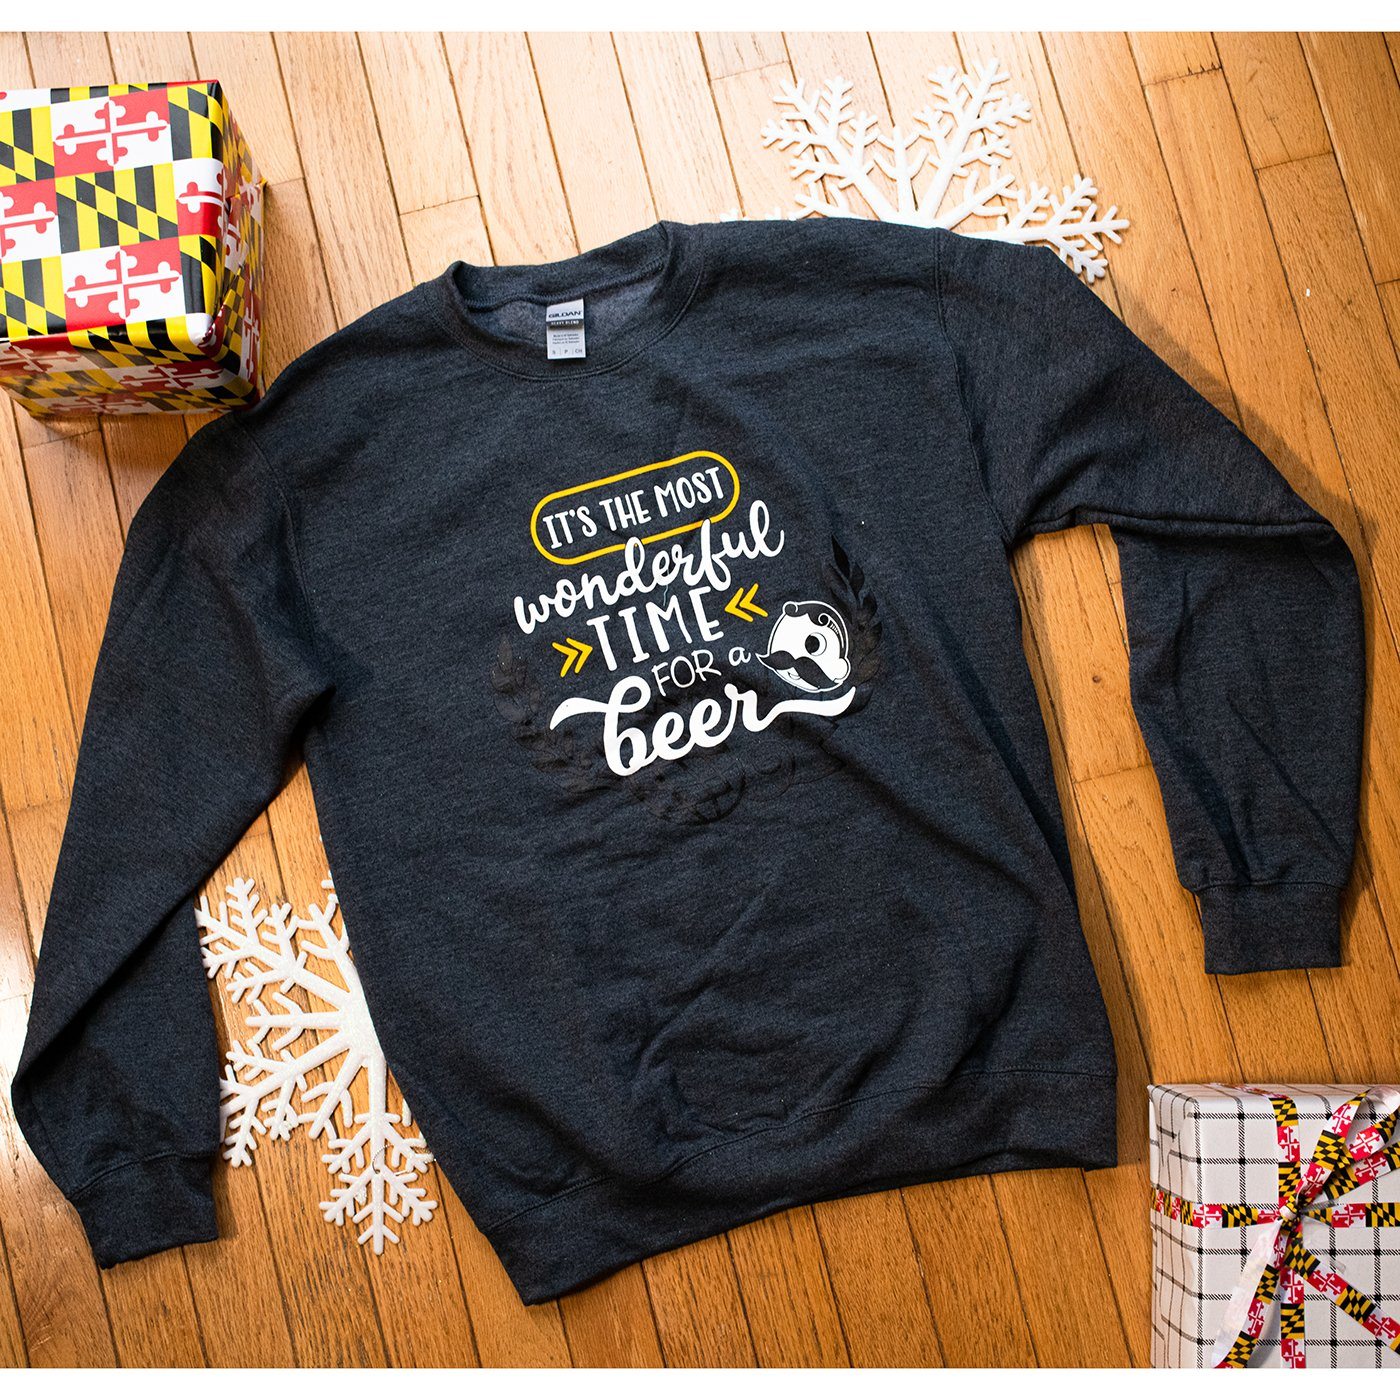 It's The Most Wonderful Time for a Beer (Dark Heather Grey) / Crew Sweatshirt - Route One Apparel